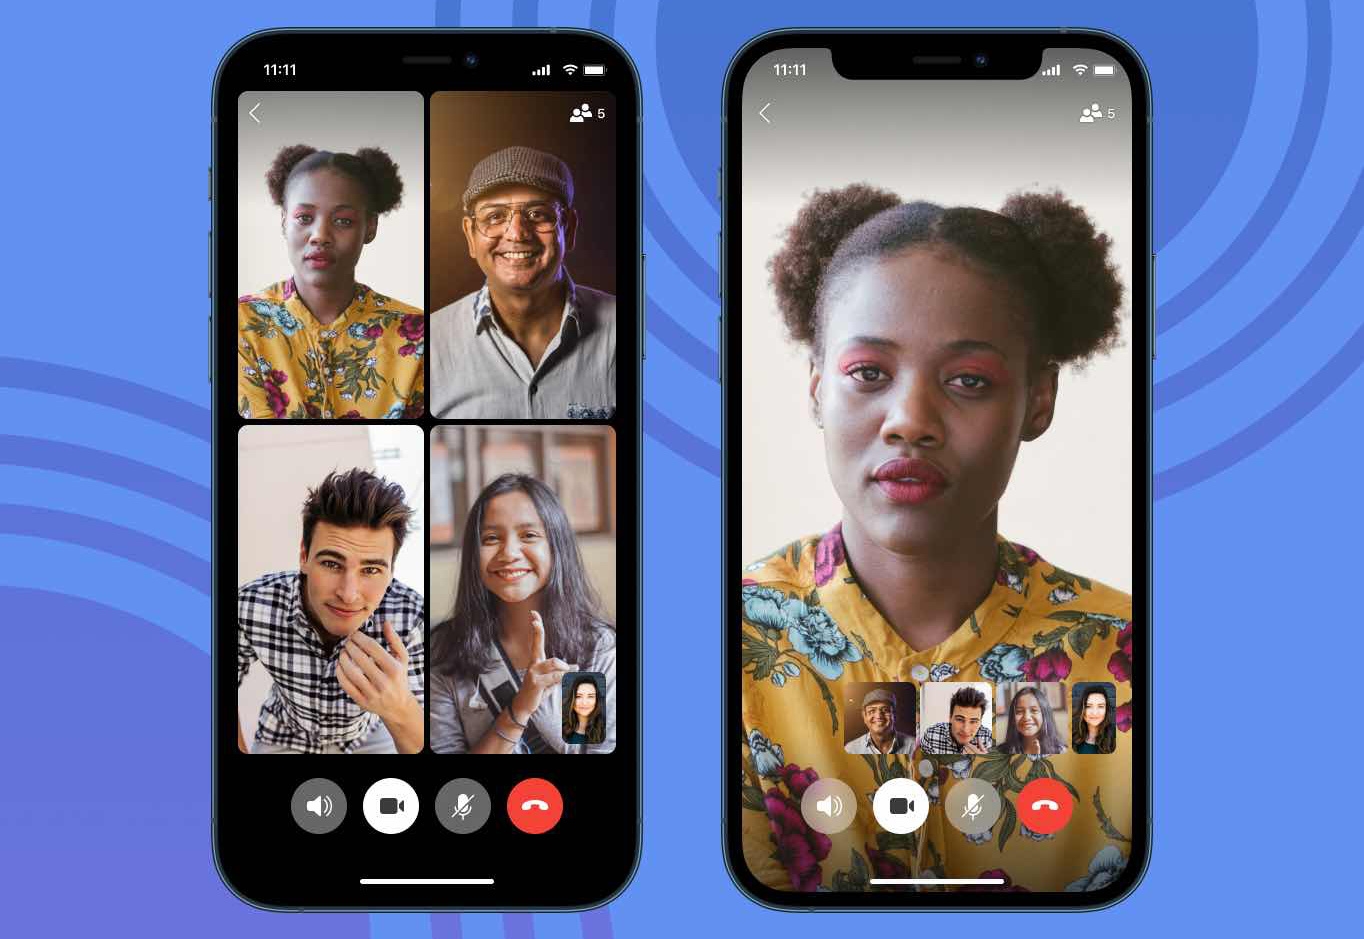 Signal secure messaging app launches encrypted group video calls | DeviceDaily.com